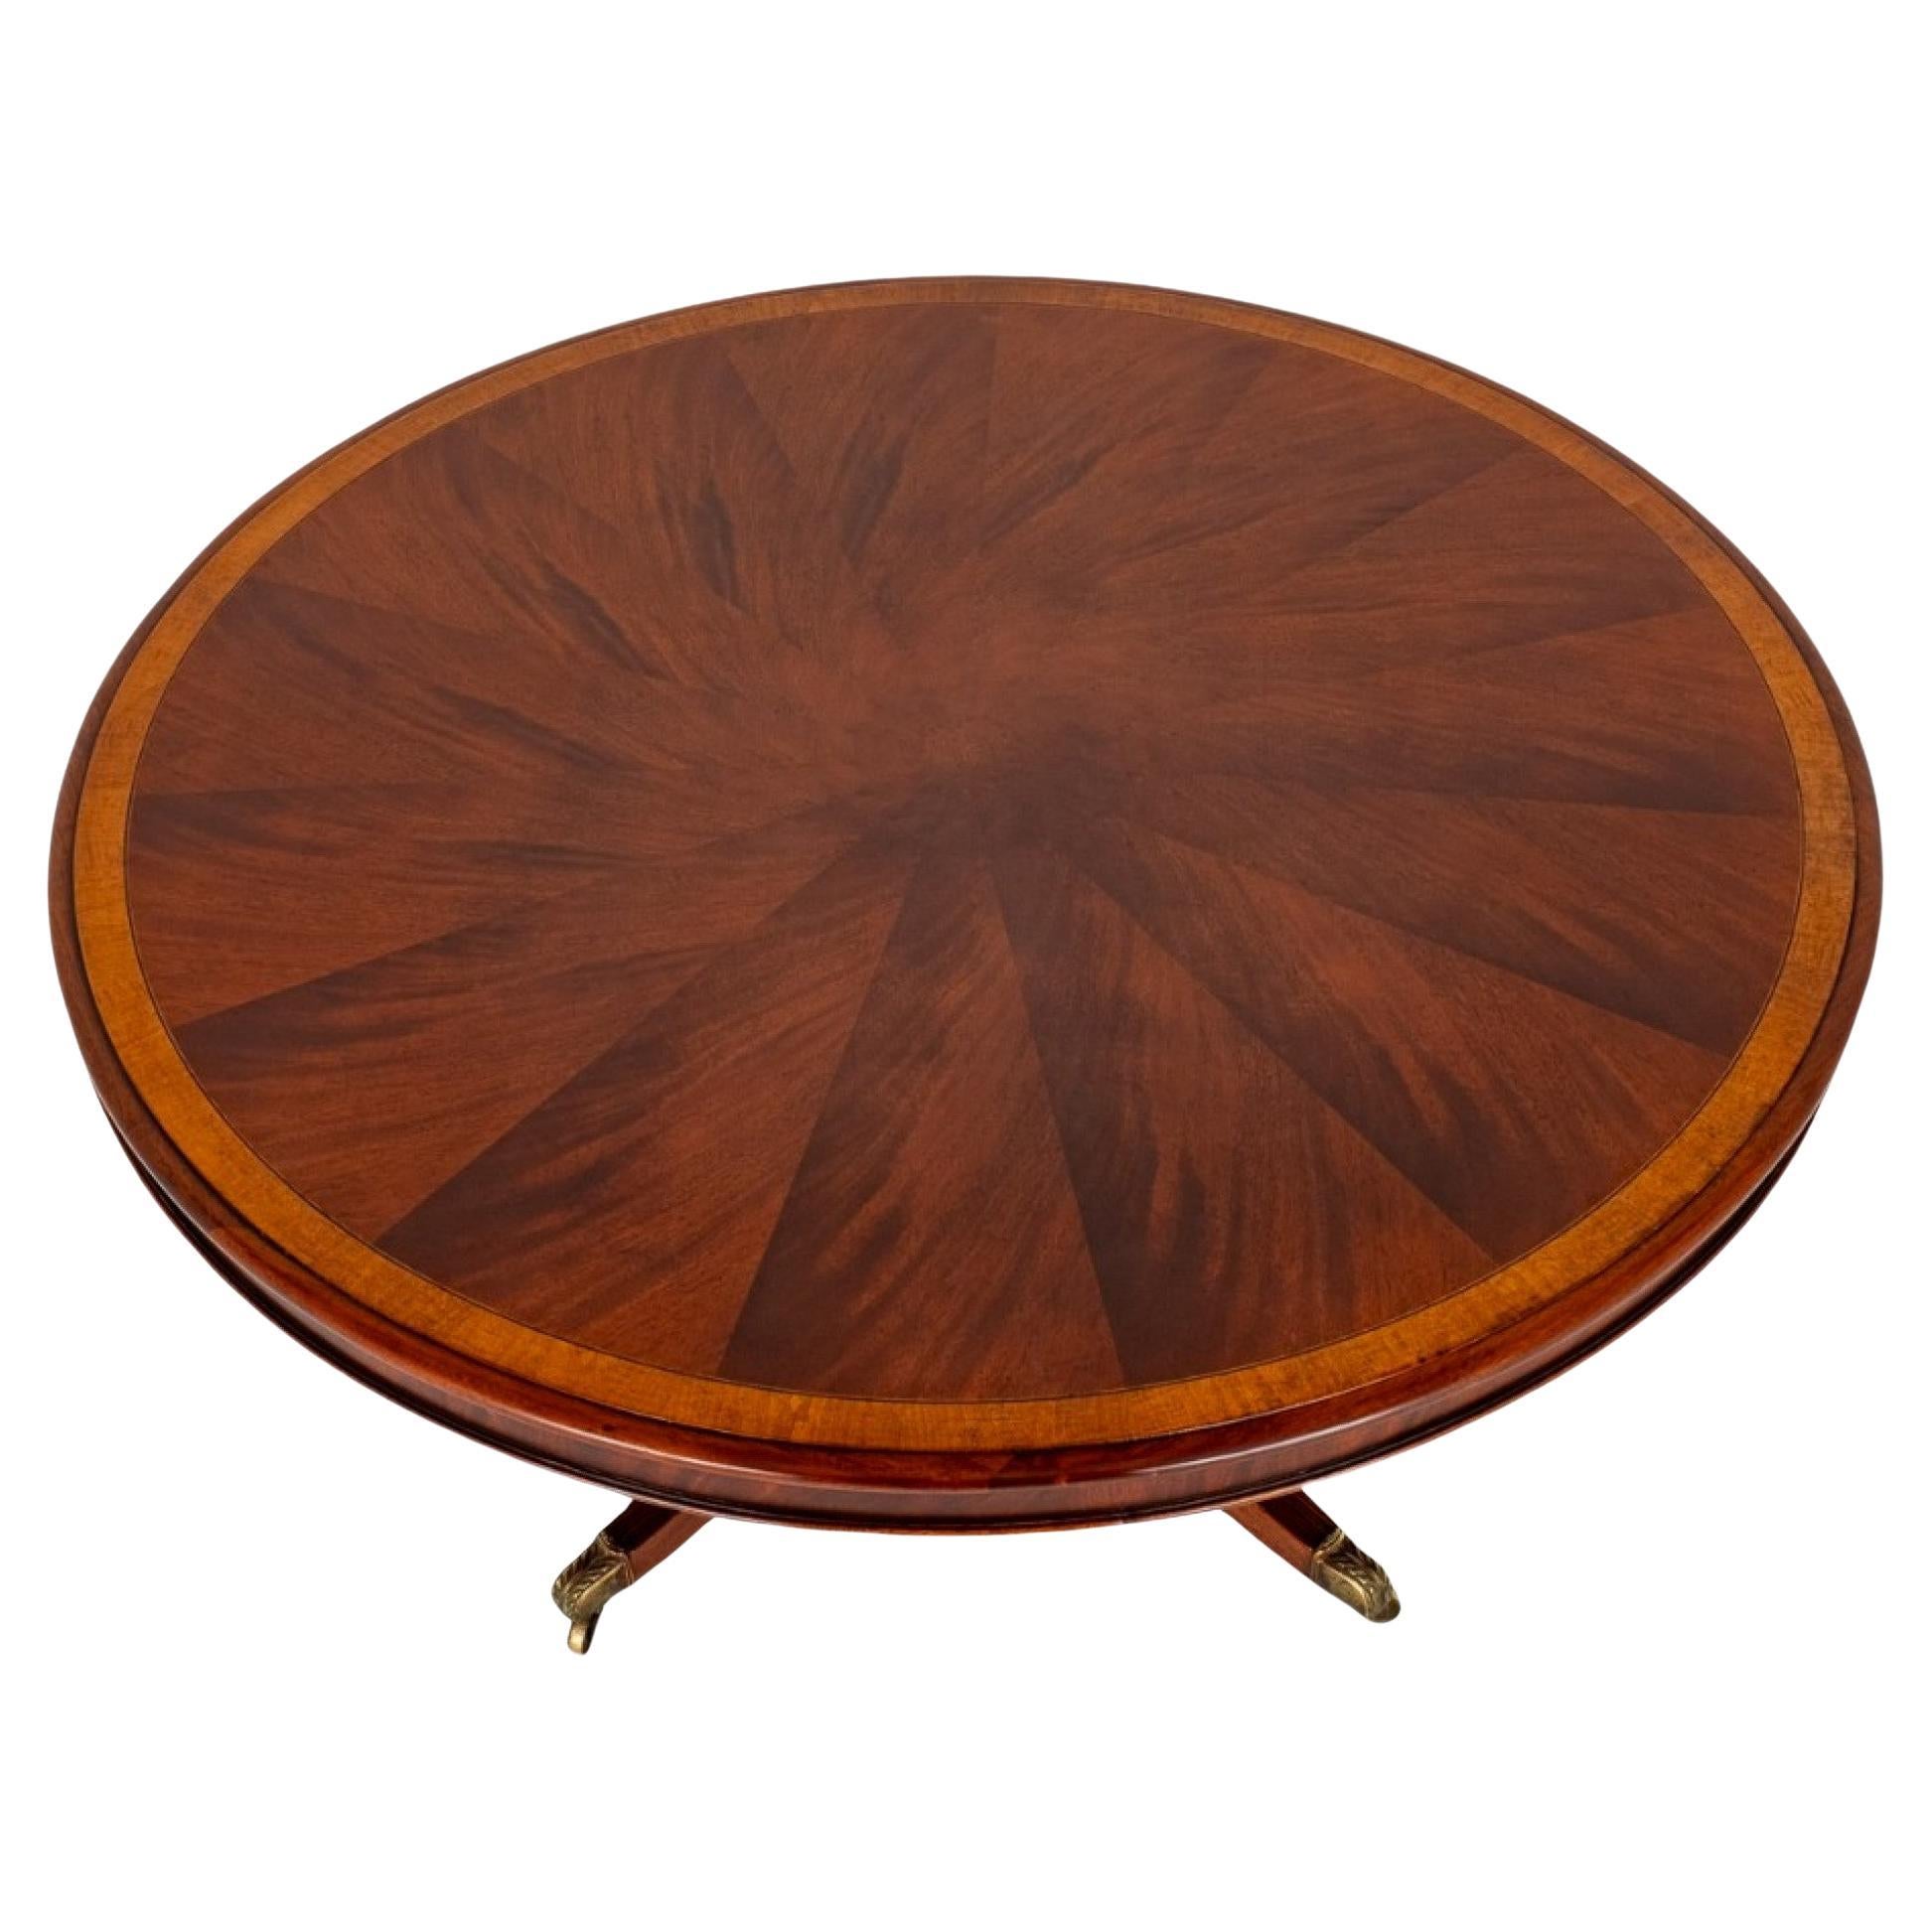 Regency Centre Table Mahogany Antique Interiors For Sale